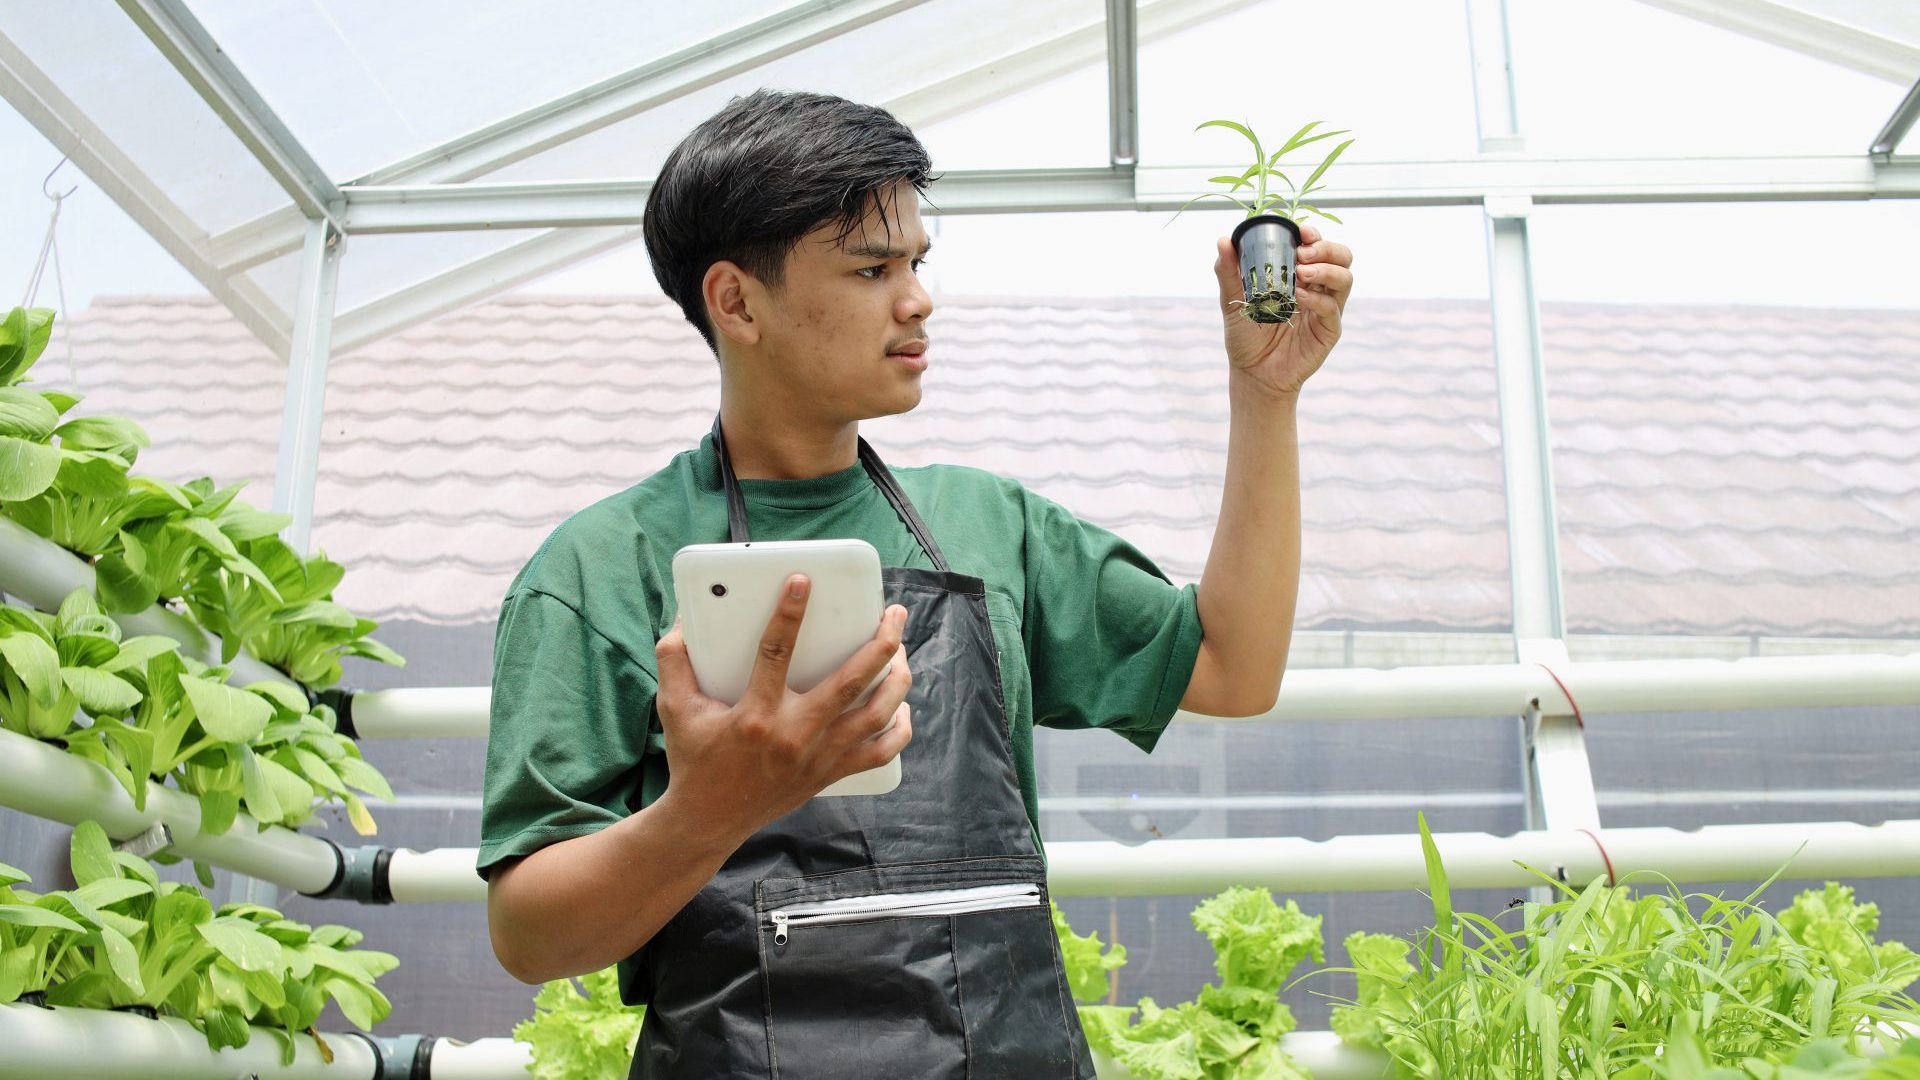 Maintaining hydroponics with technology